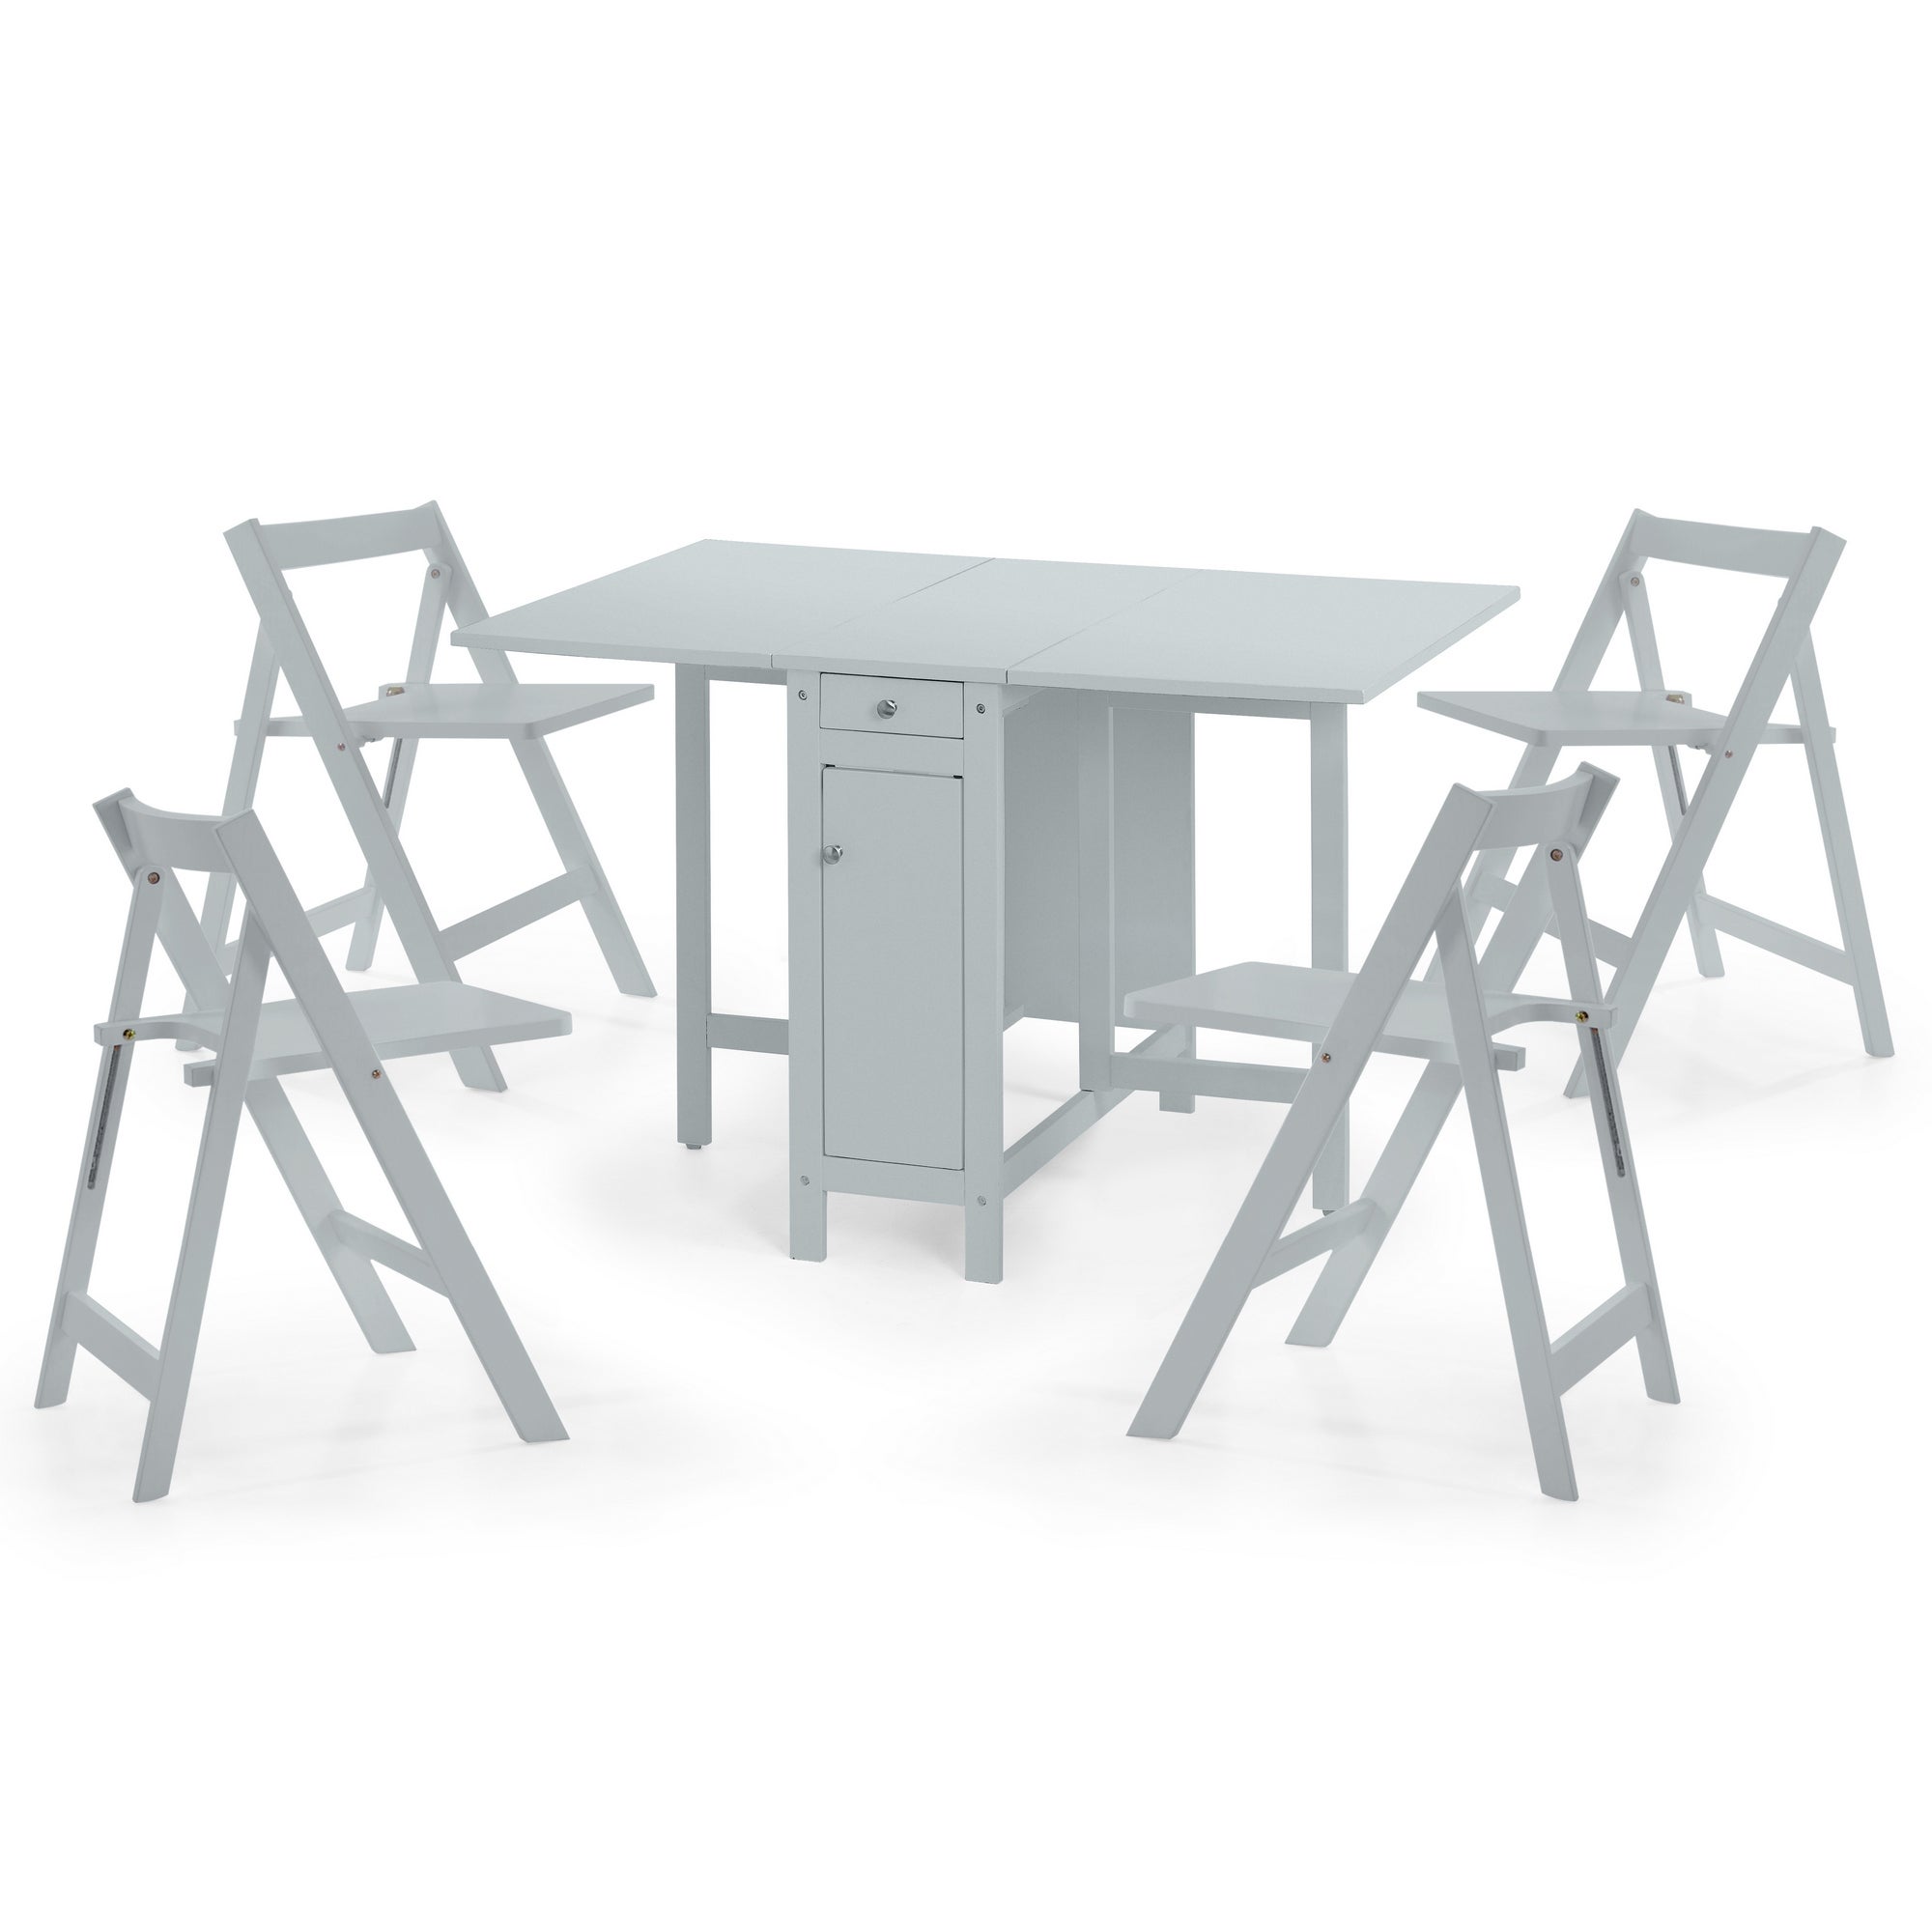 Savoy Rectangular Extendable Dining Table with 4 Chairs